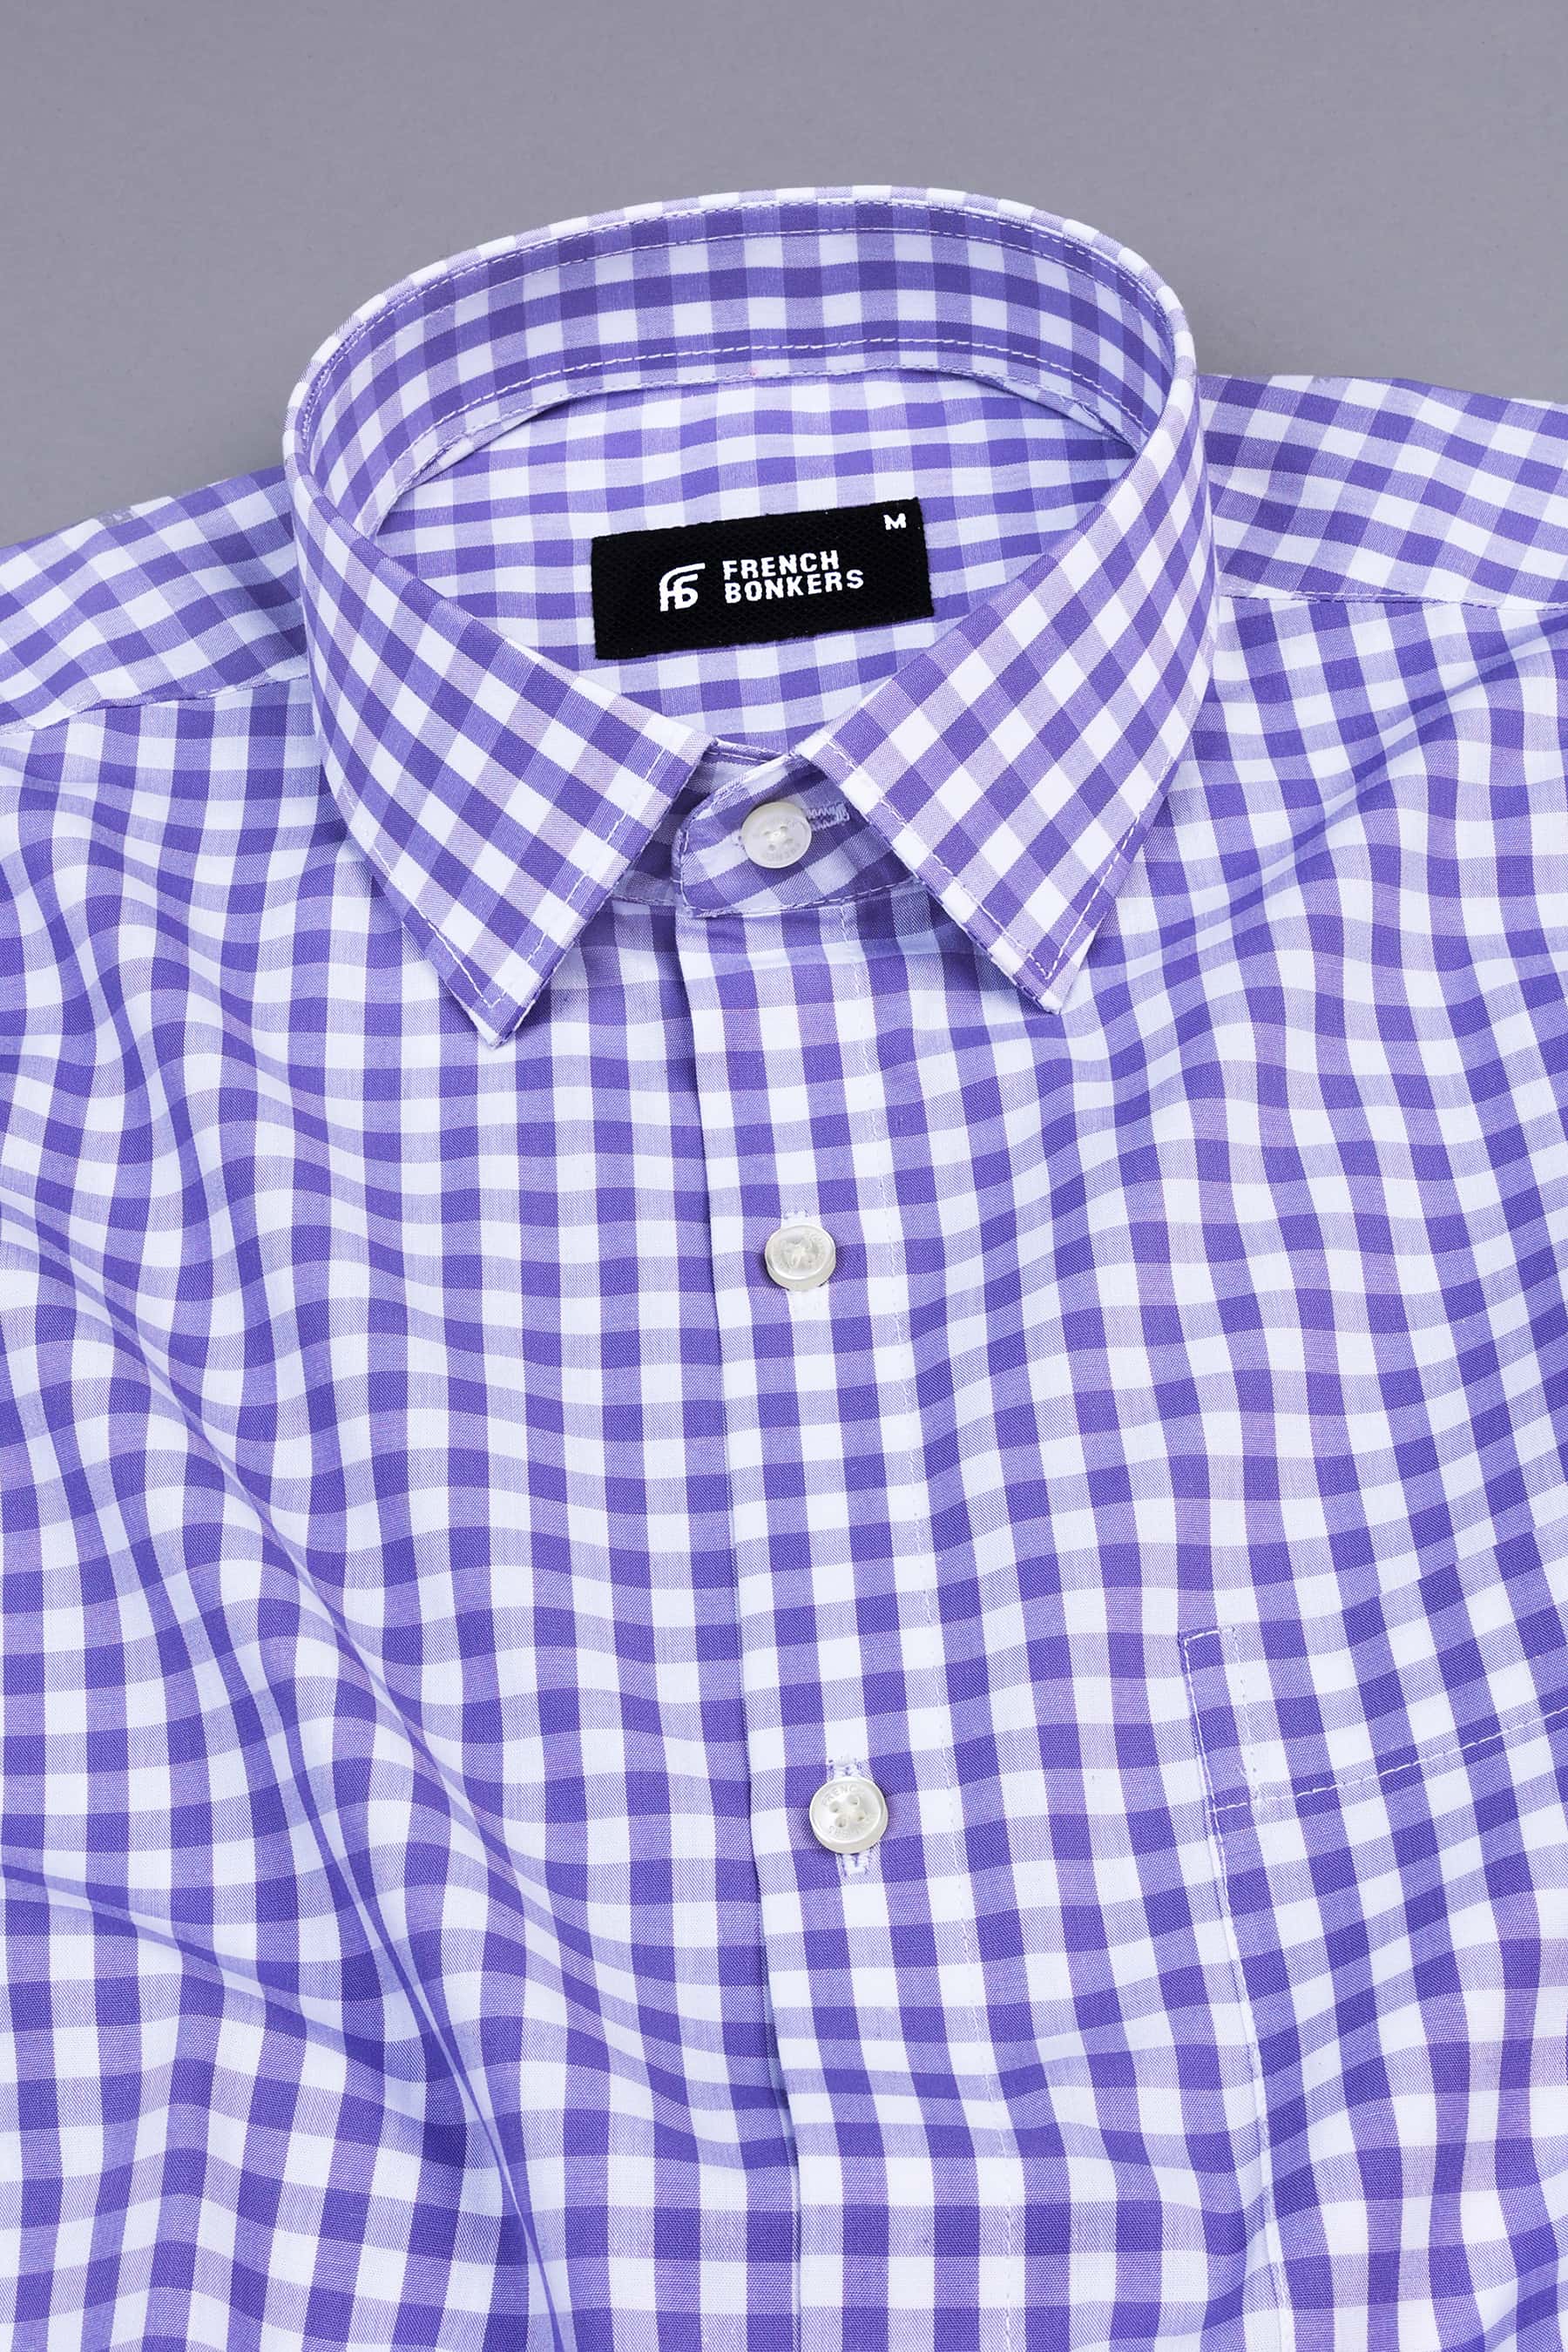 Royal purple with white oxford gingham check shirt